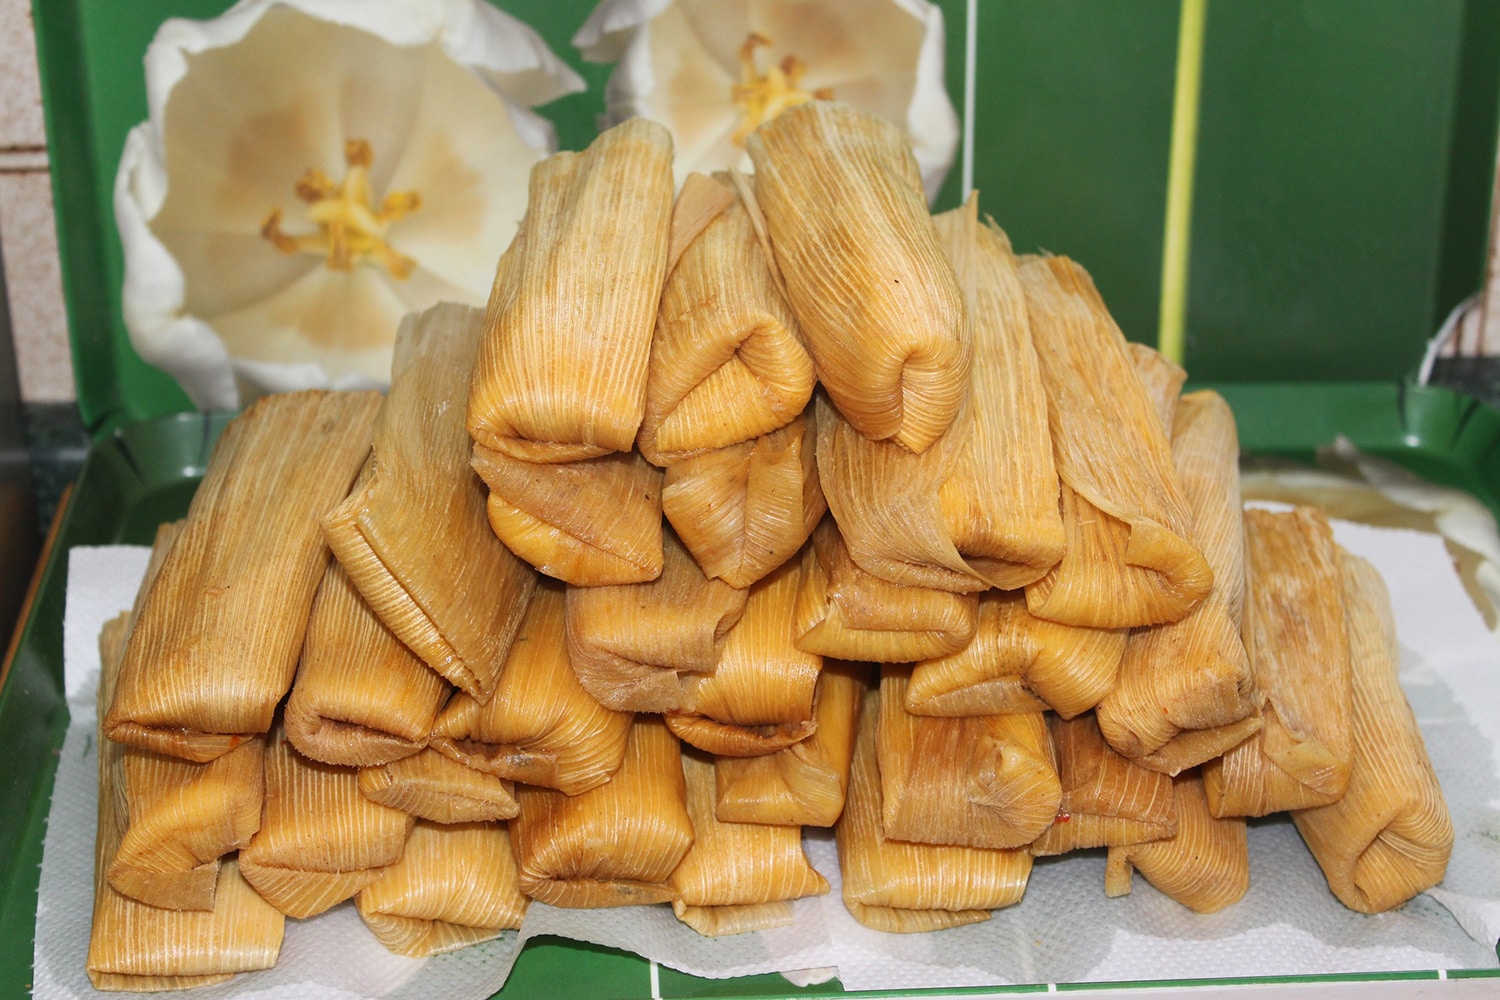 Image of Tamales